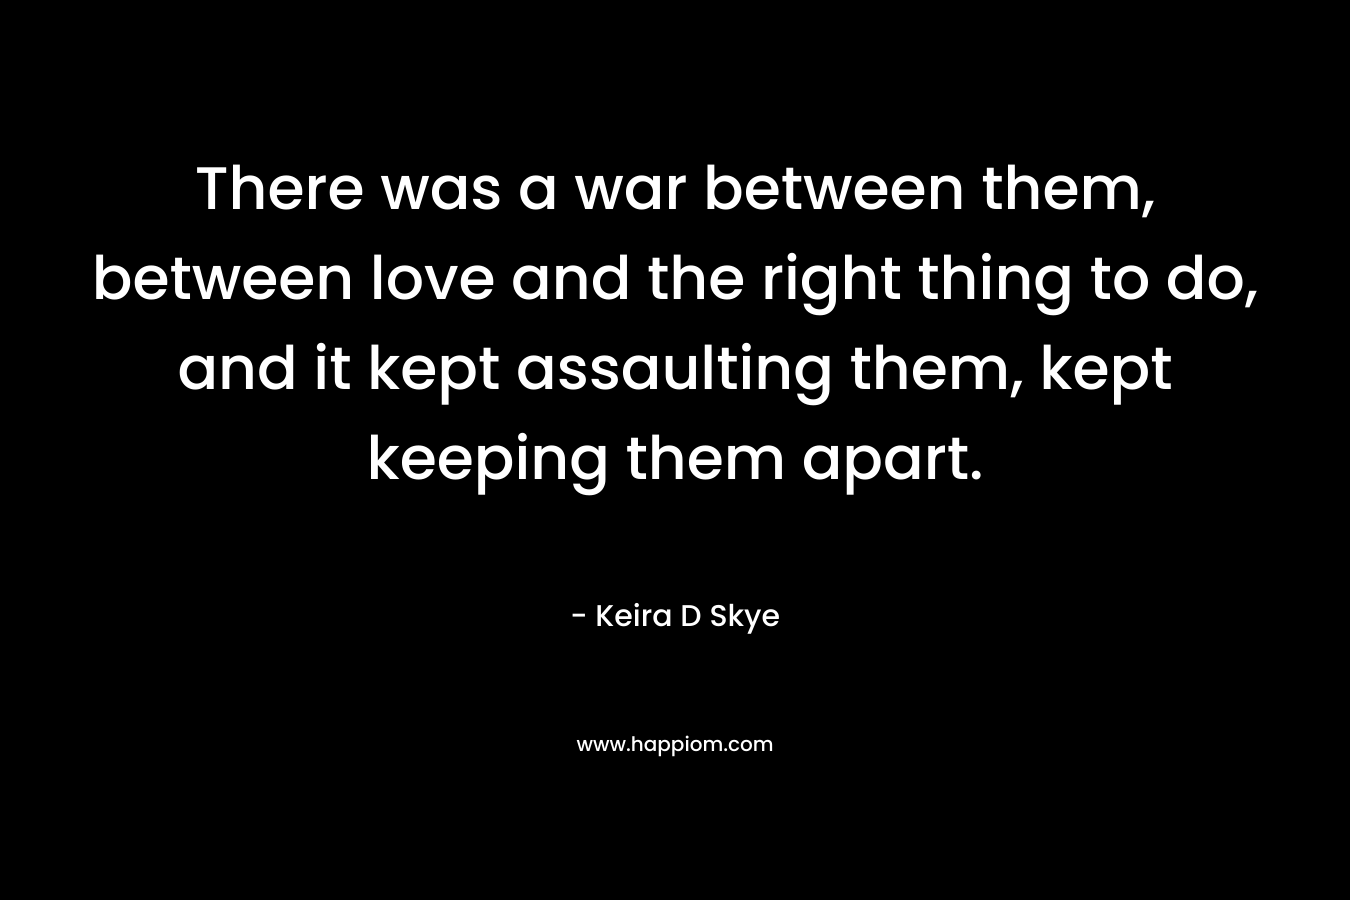 There was a war between them, between love and the right thing to do, and it kept assaulting them, kept keeping them apart.